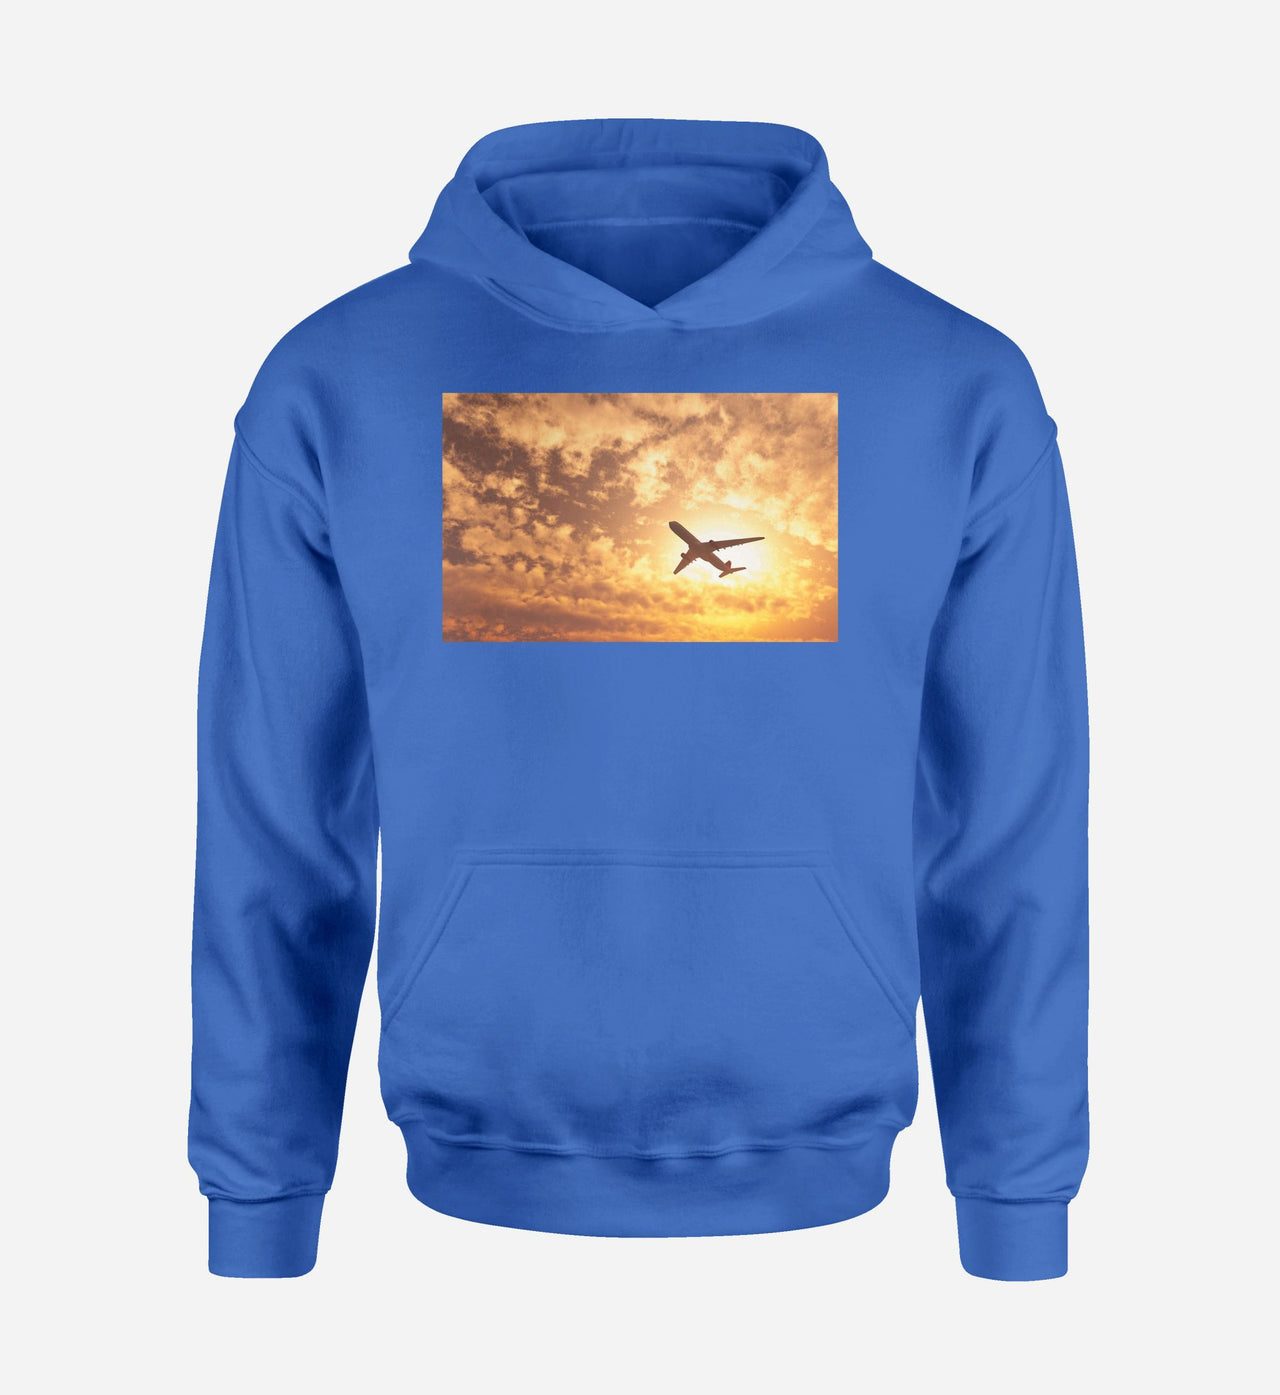 Plane Passing By Designed Hoodies